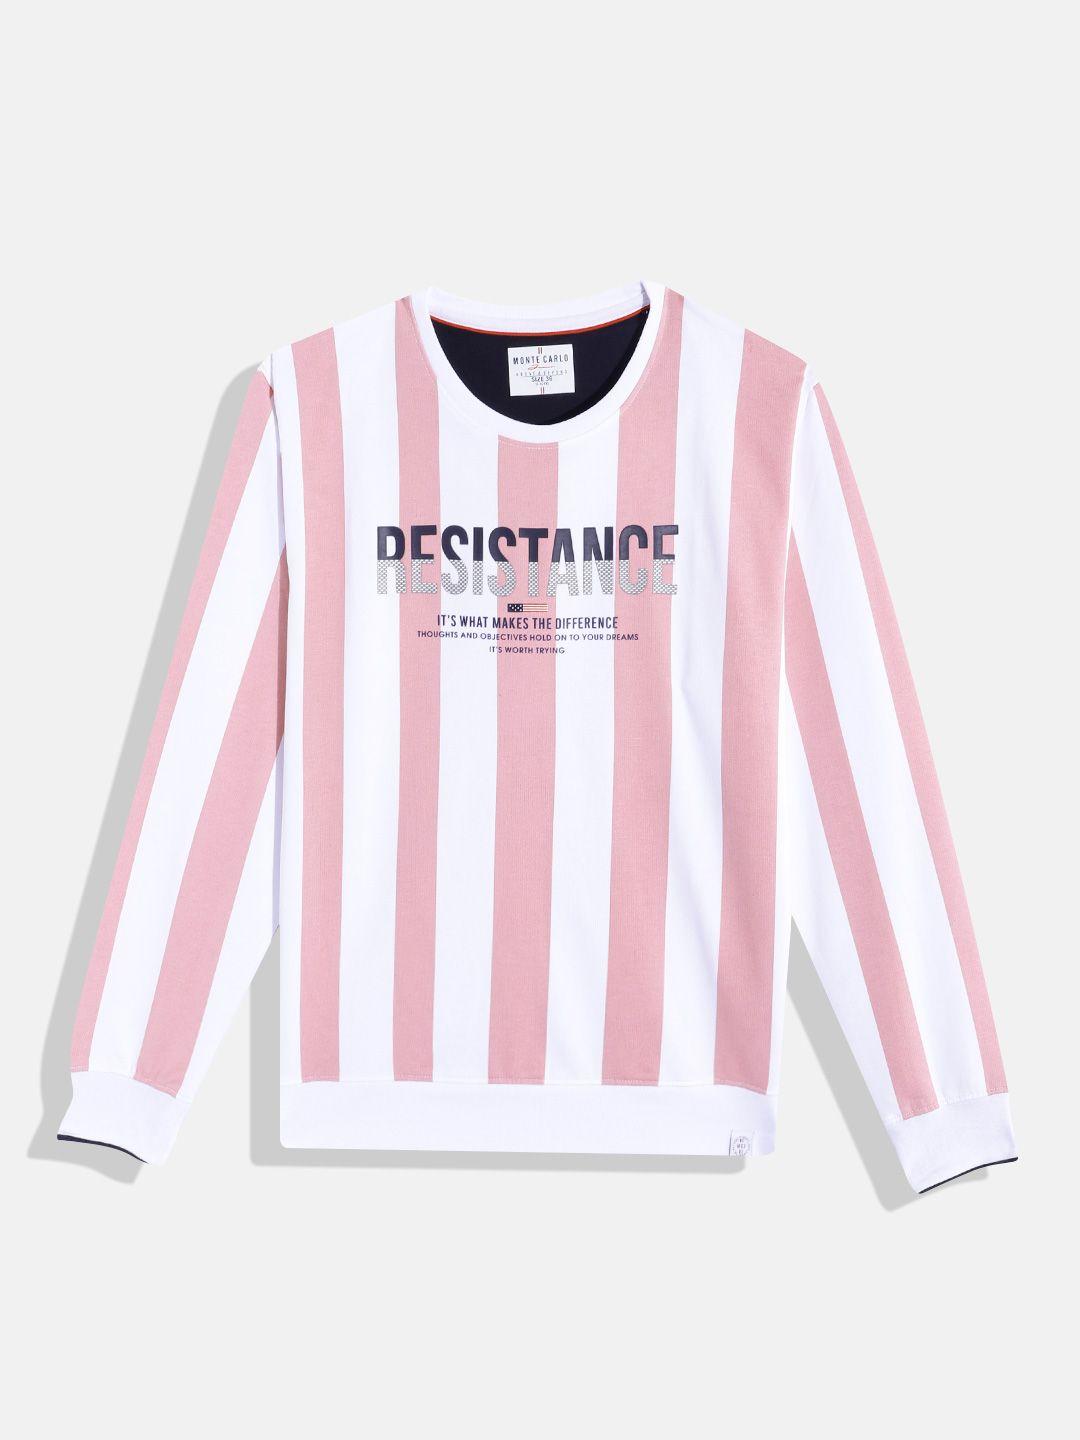 monte carlo teen boys striped pure cotton sweatshirt with printed detail